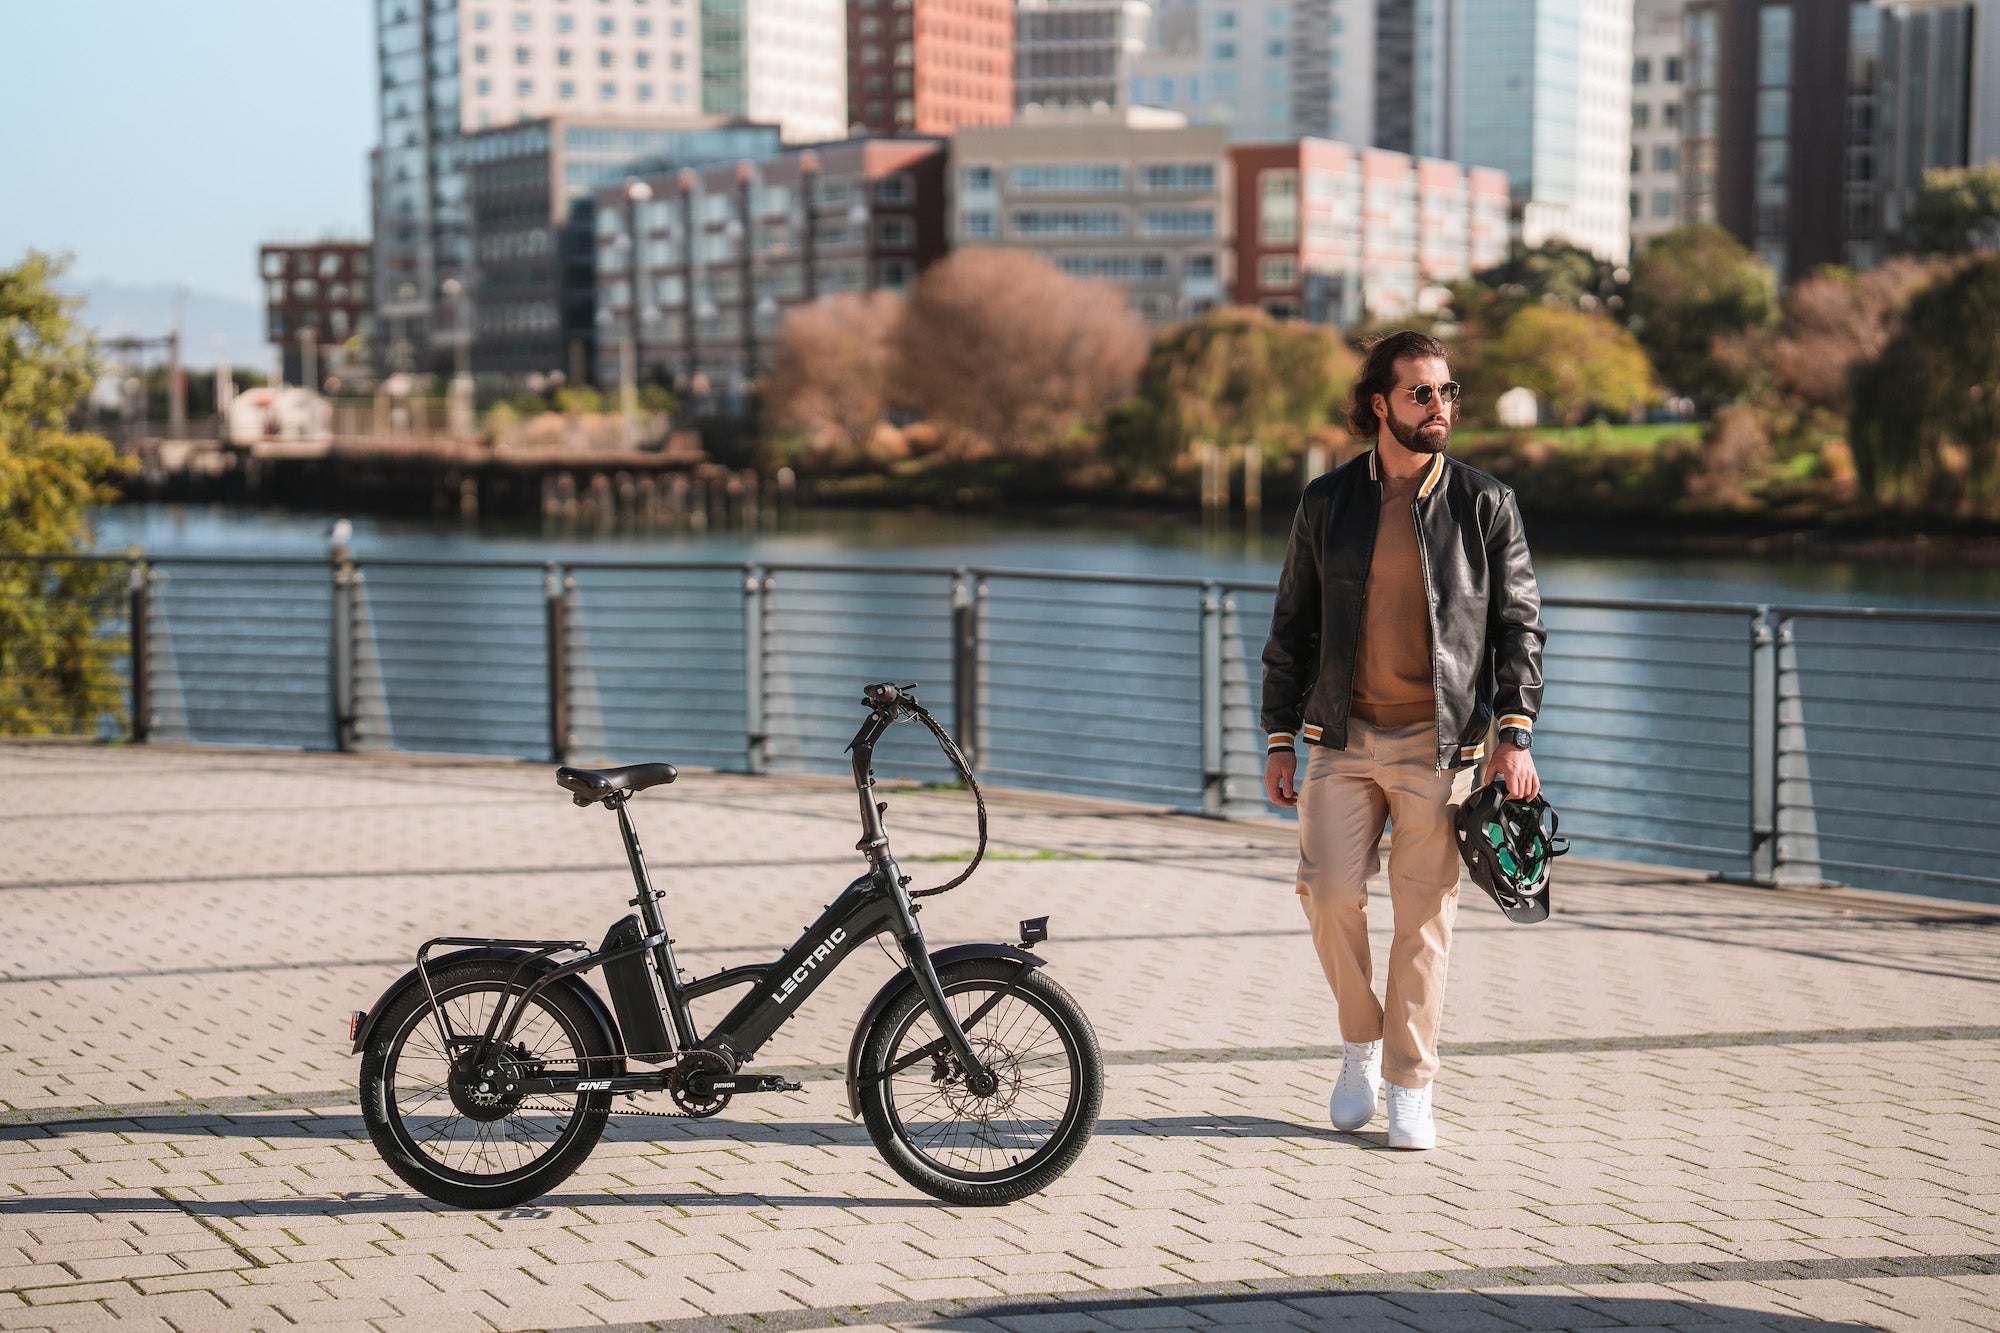 The Cost of an eBike = One Car Payment